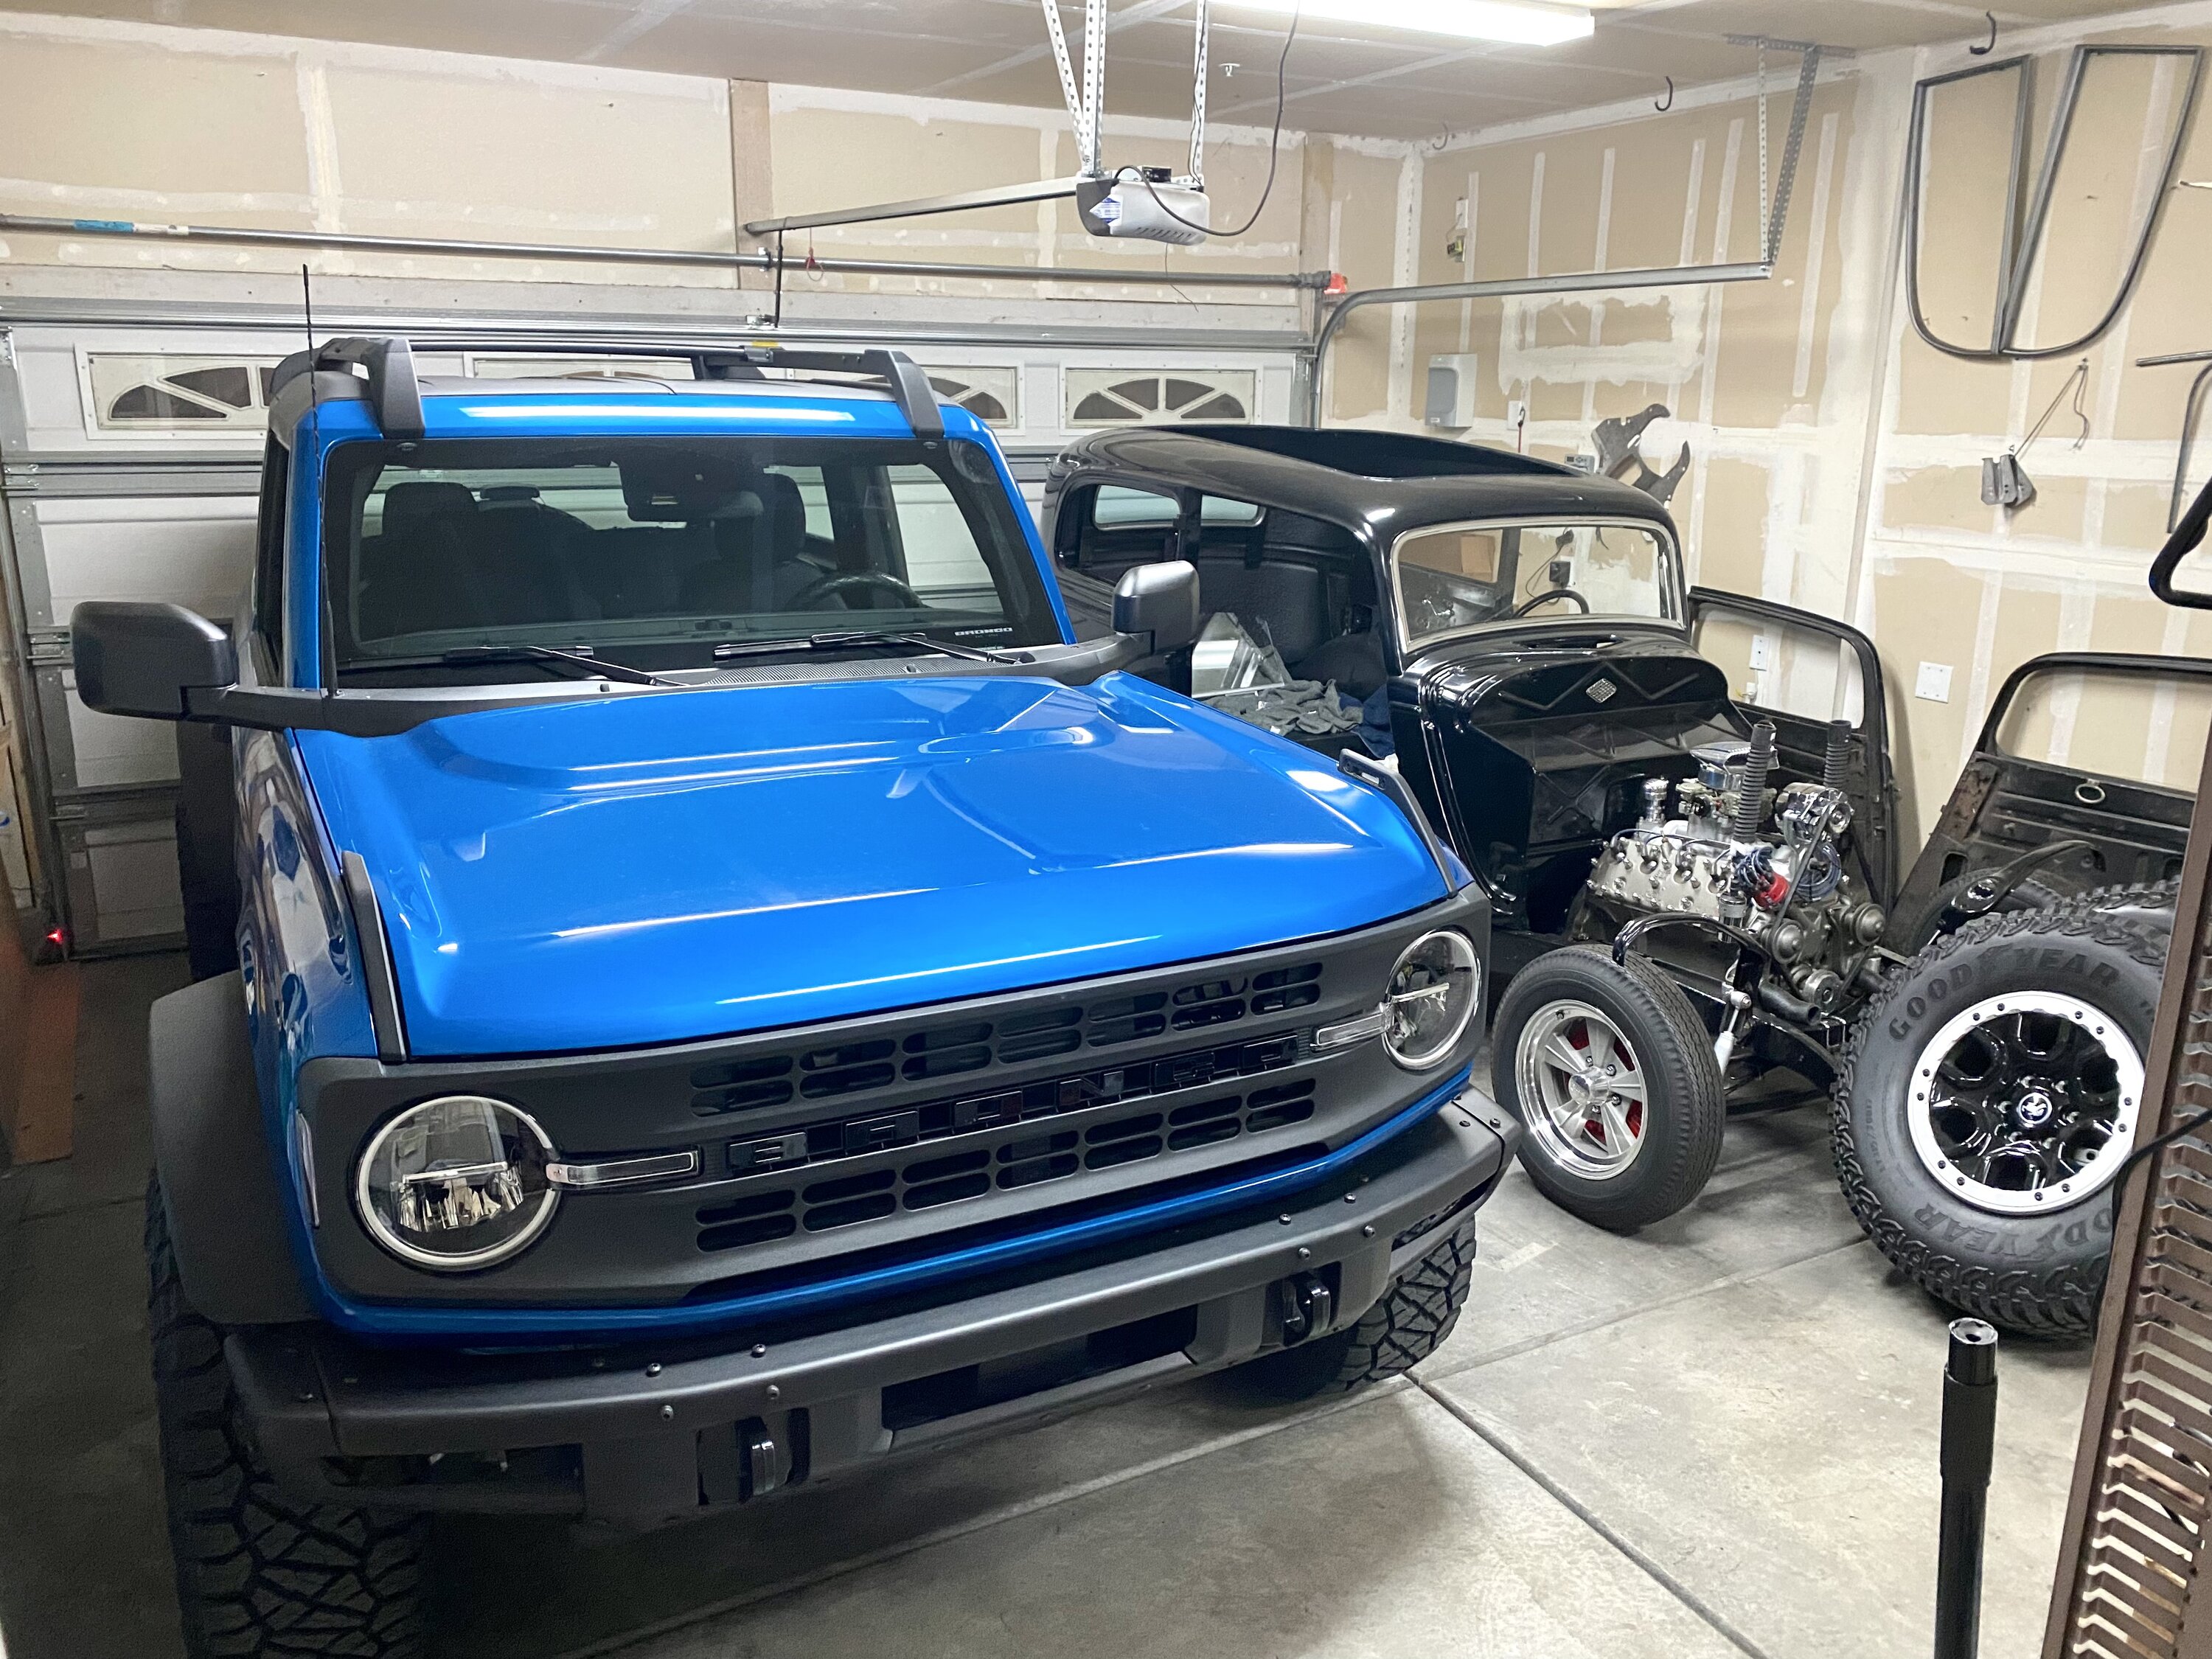 Ford Bronco Garage Makeover For Your Bronco? Show Yours 📸 37C6C0AD-7ED1-463C-84F3-C78659E8EC47